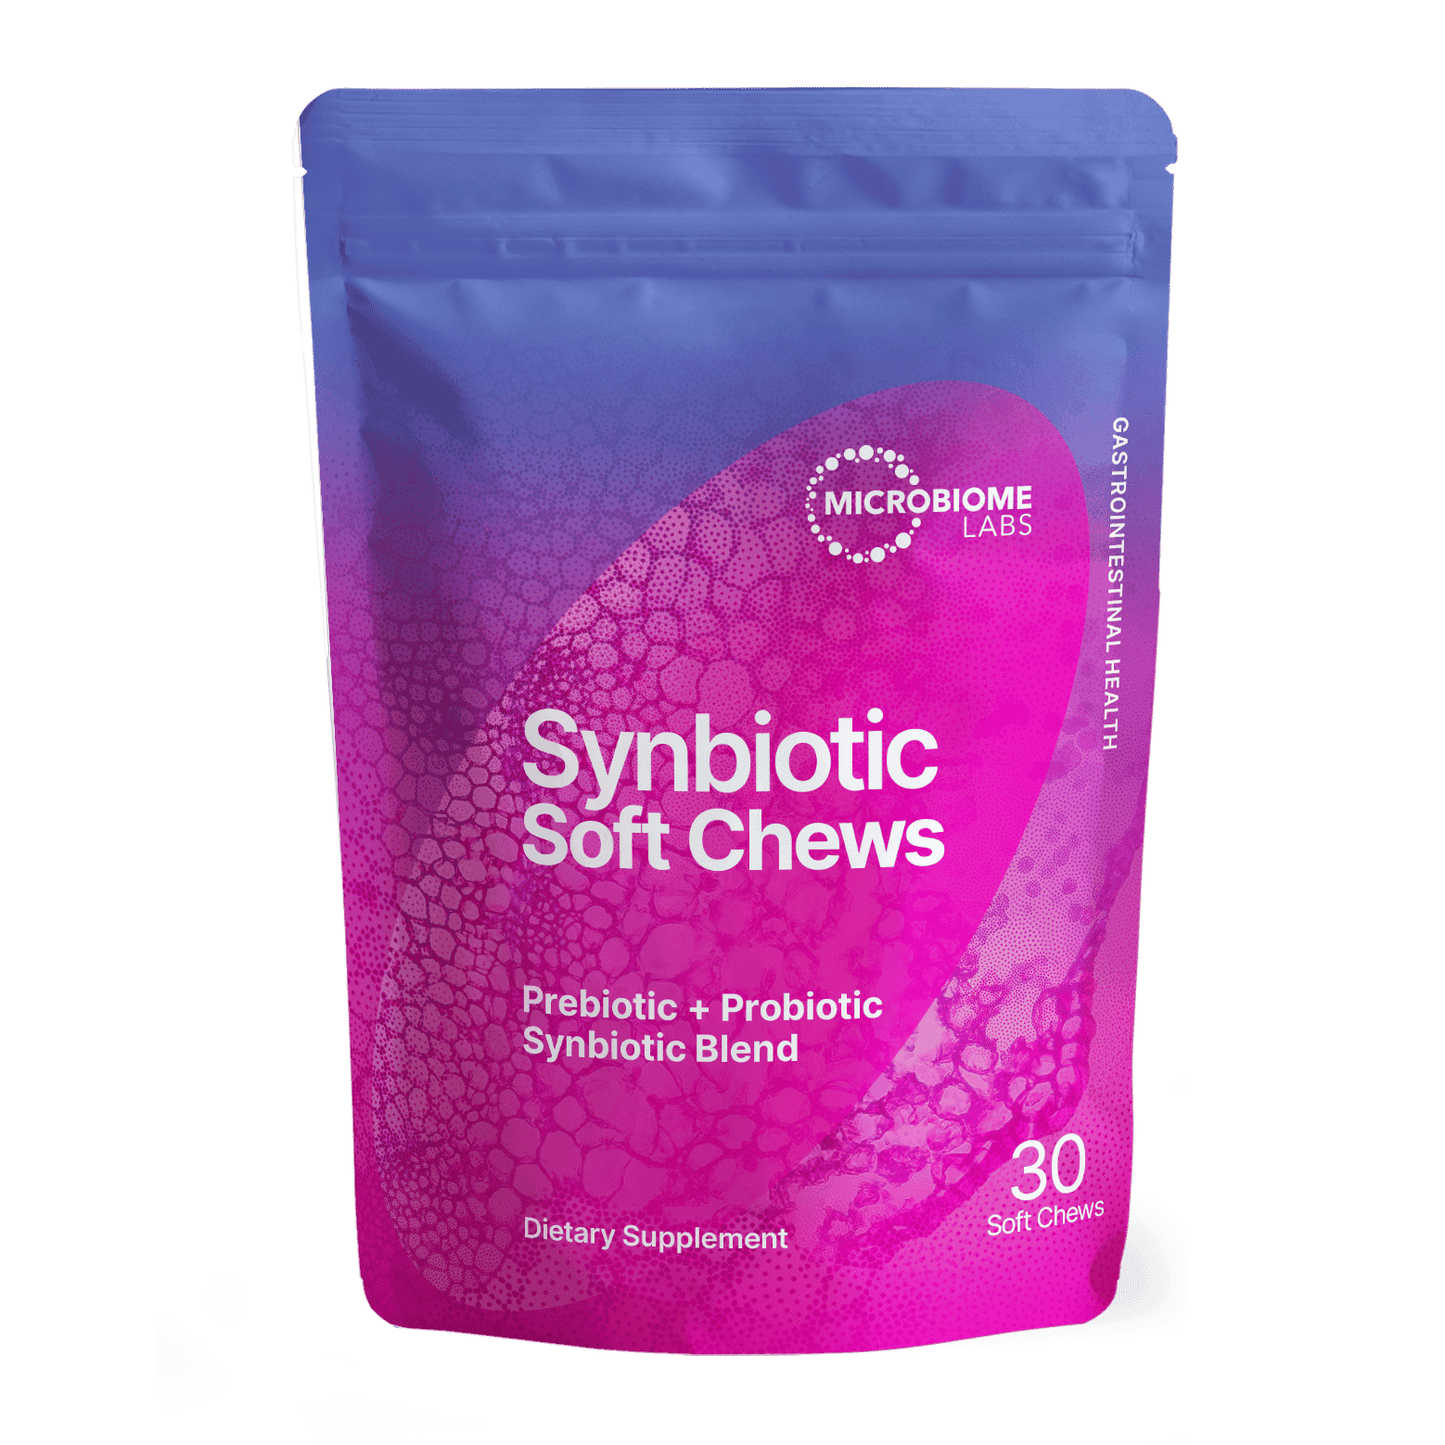 Synbiotic Mixed Berry Chews (Currently on back order with Manufacturer)